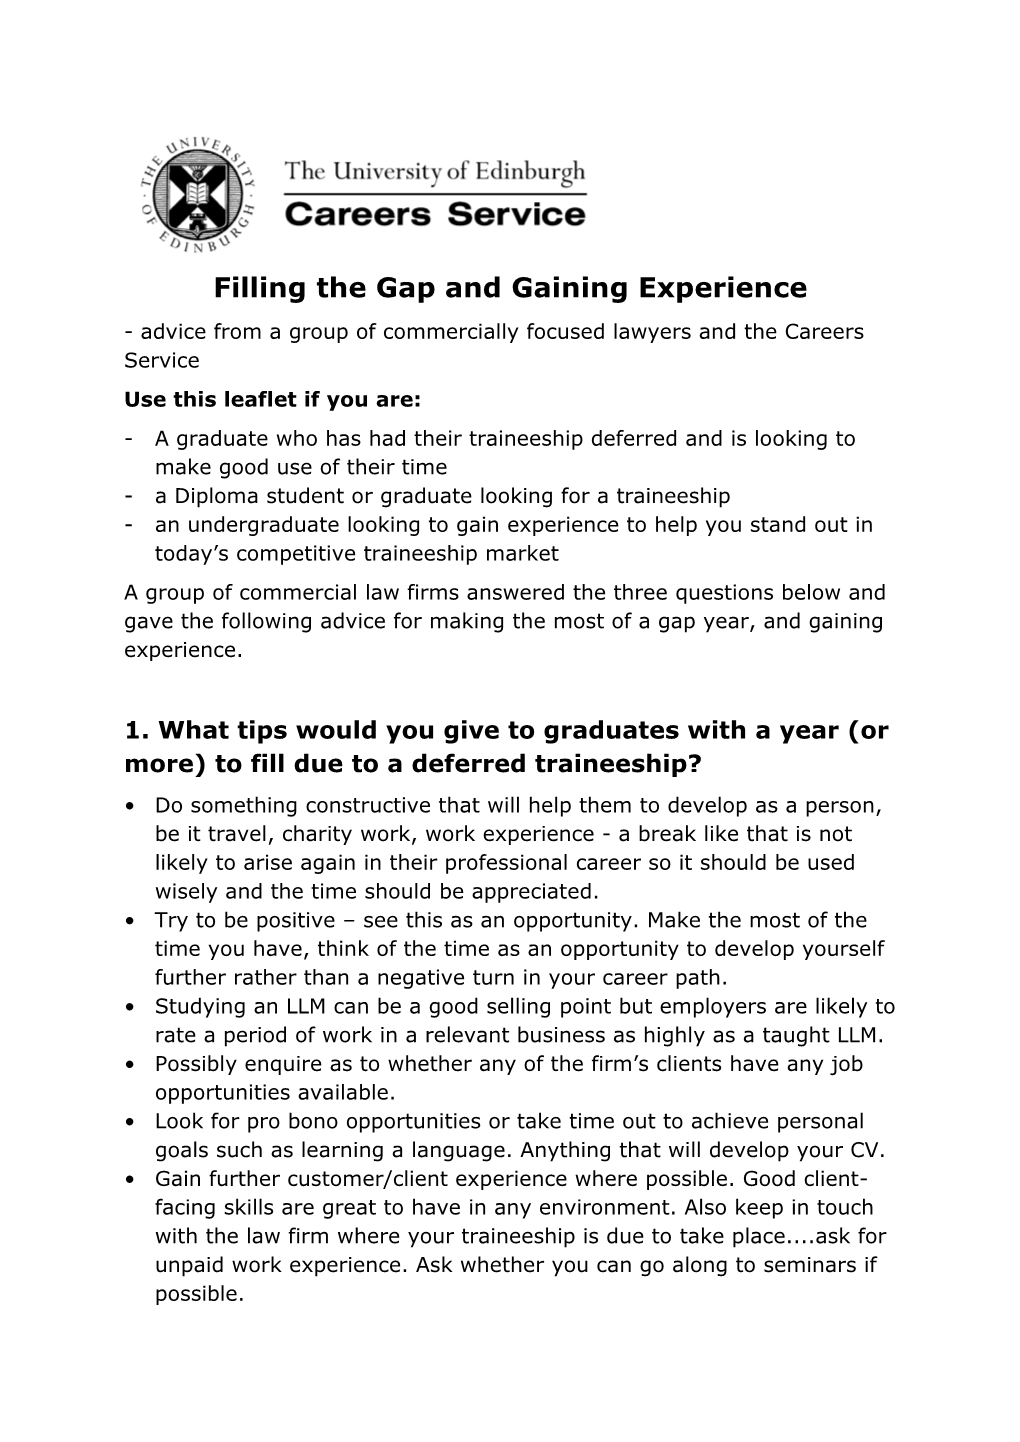 Filling the Gap and Gaining Experience